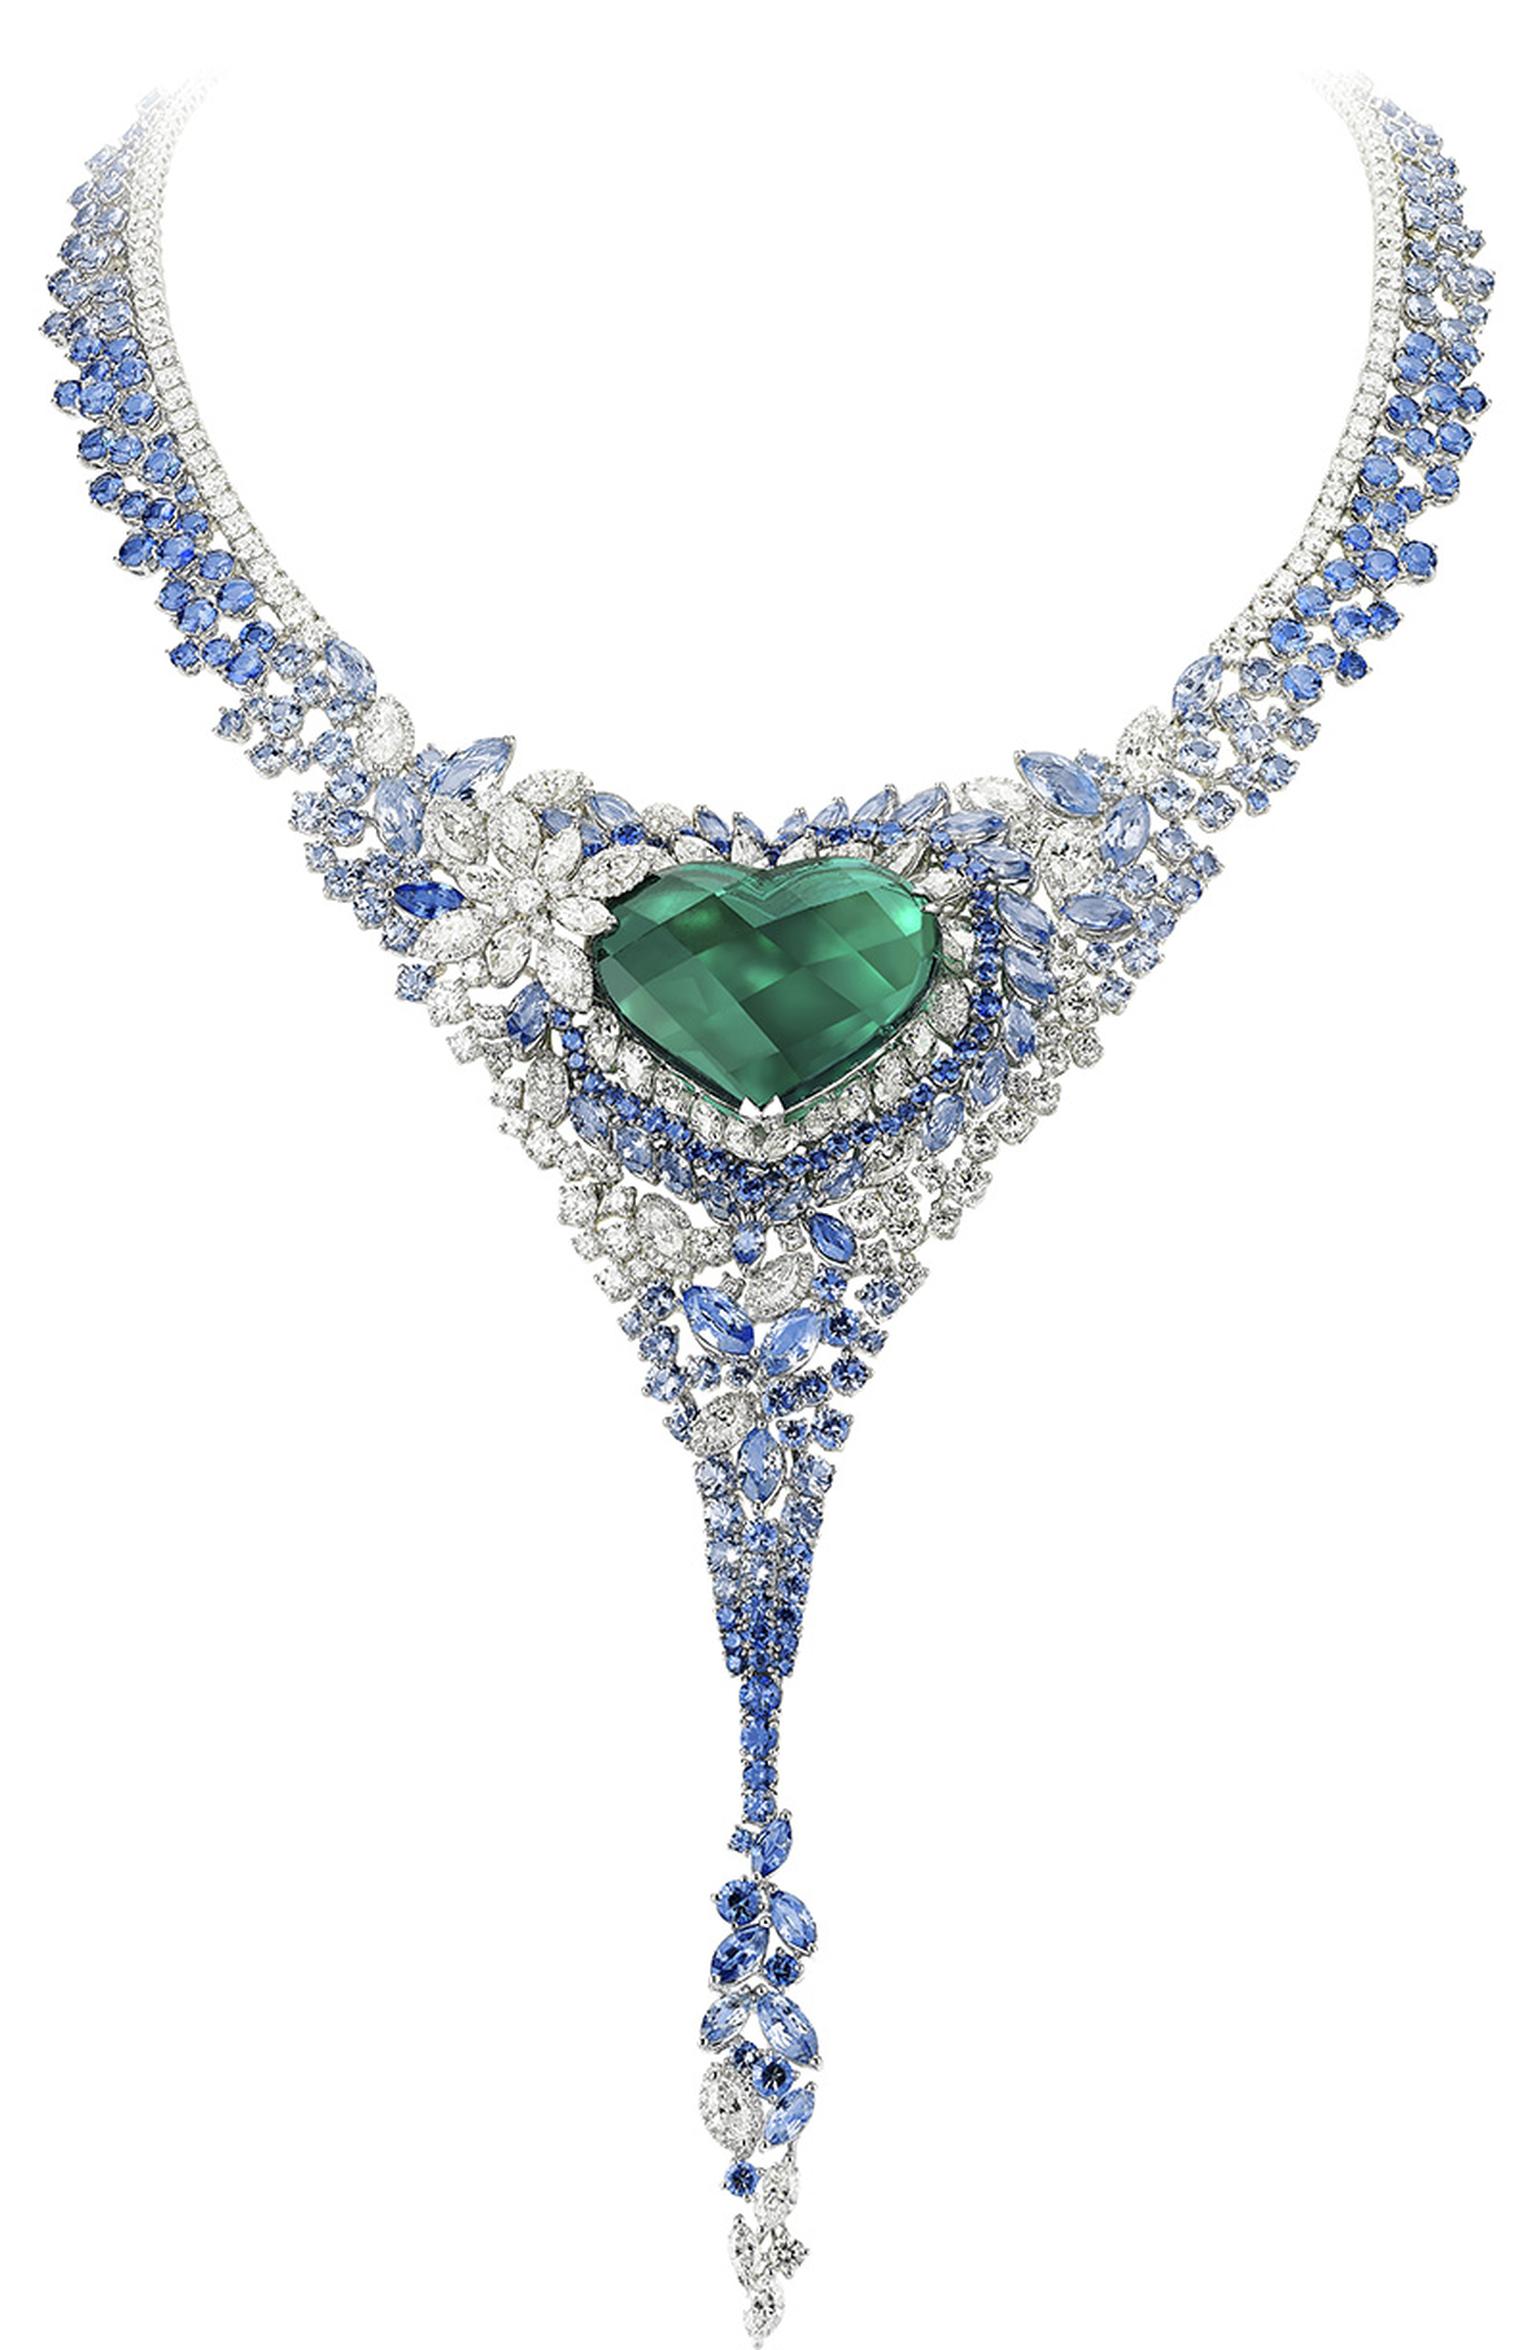 01-Avakian-Heart-shape-emerald-and-sapphire-necklace